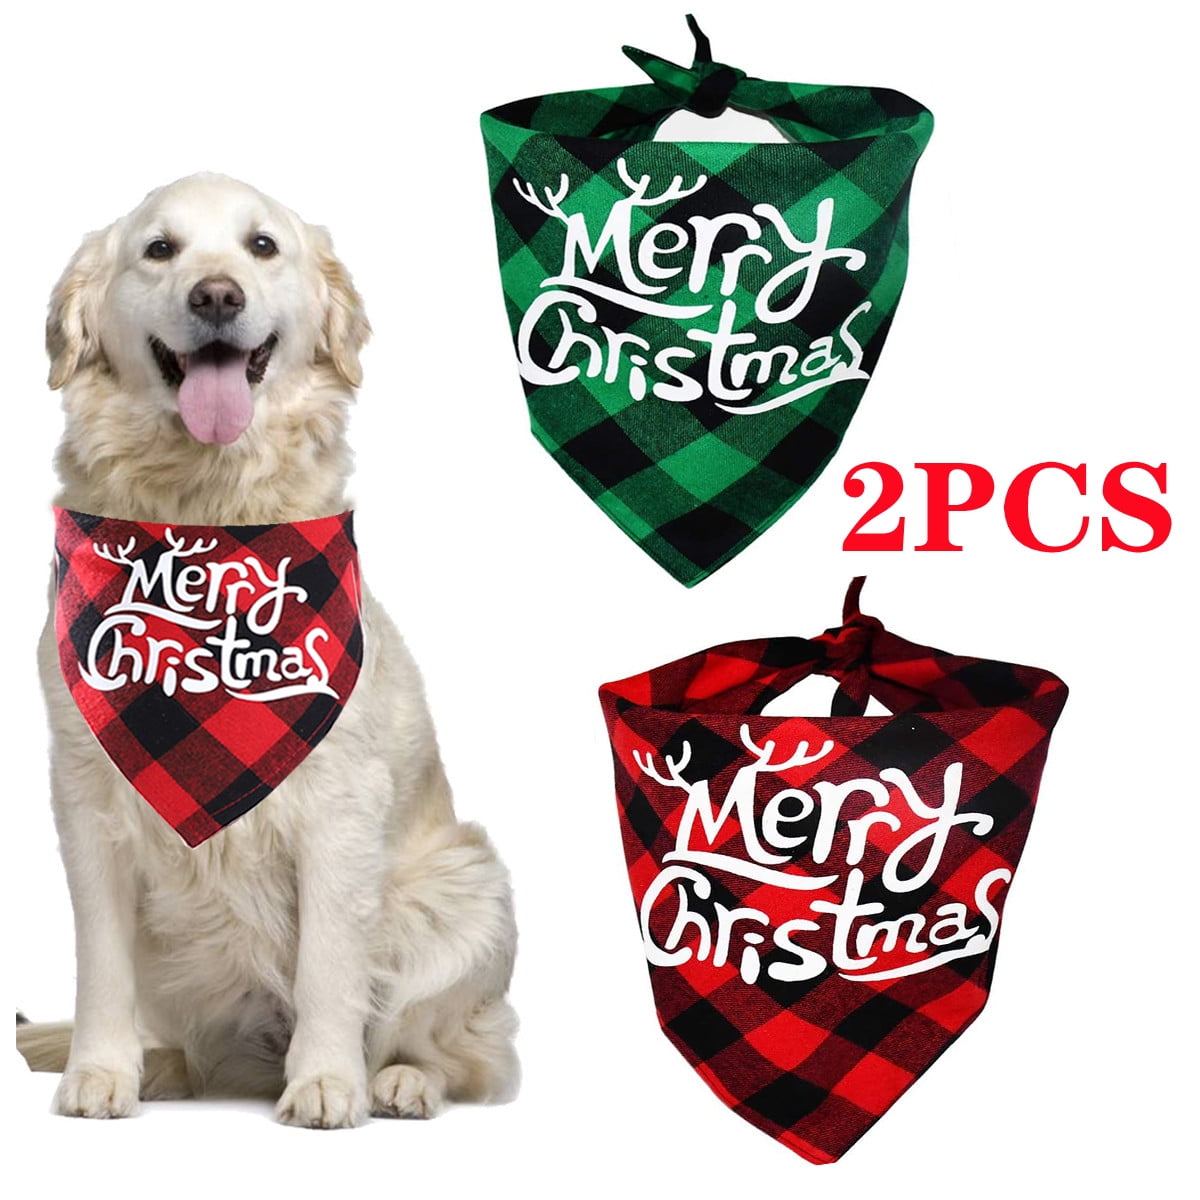 Bulldogs and Other Large Dogs Golden Retriever Dog Neckerchief Collar Large Dog Triangle Bibs Washable Birthday Presents for Labradors Dog Christmas Bandana 2 Pack Pets Xmas Kerchief Outfit